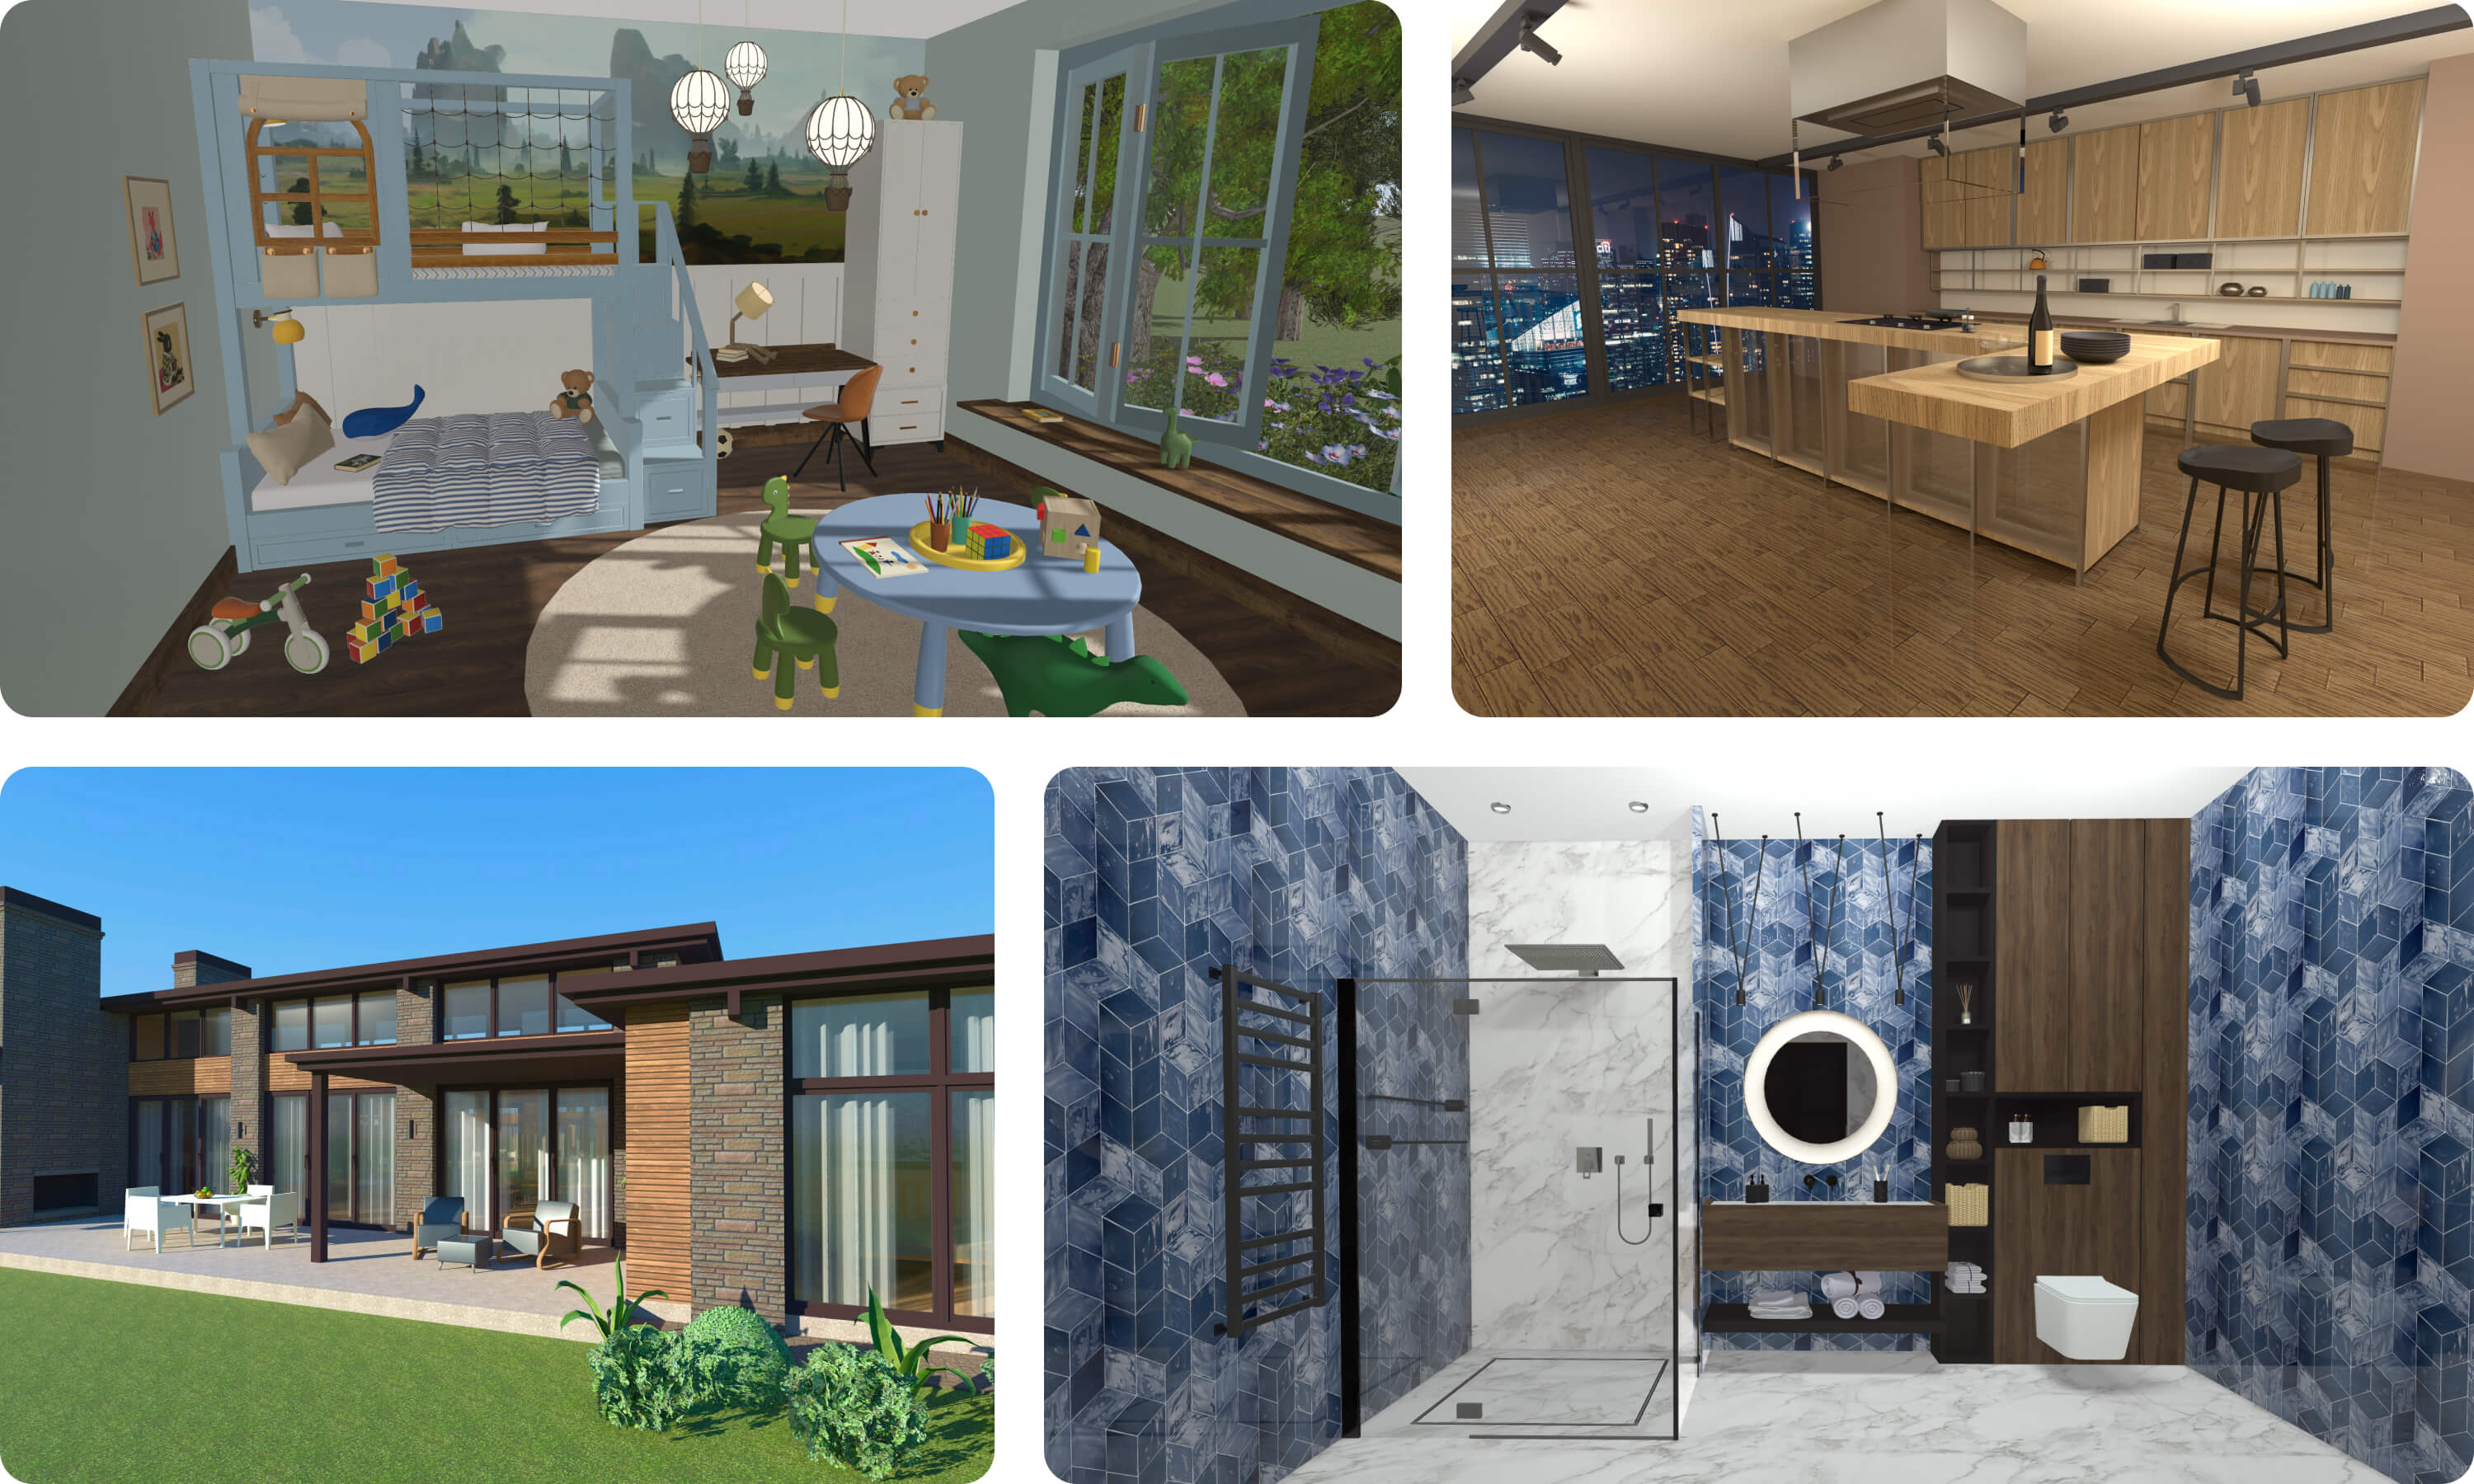 Houses designed in the Live Home 3D home design app.